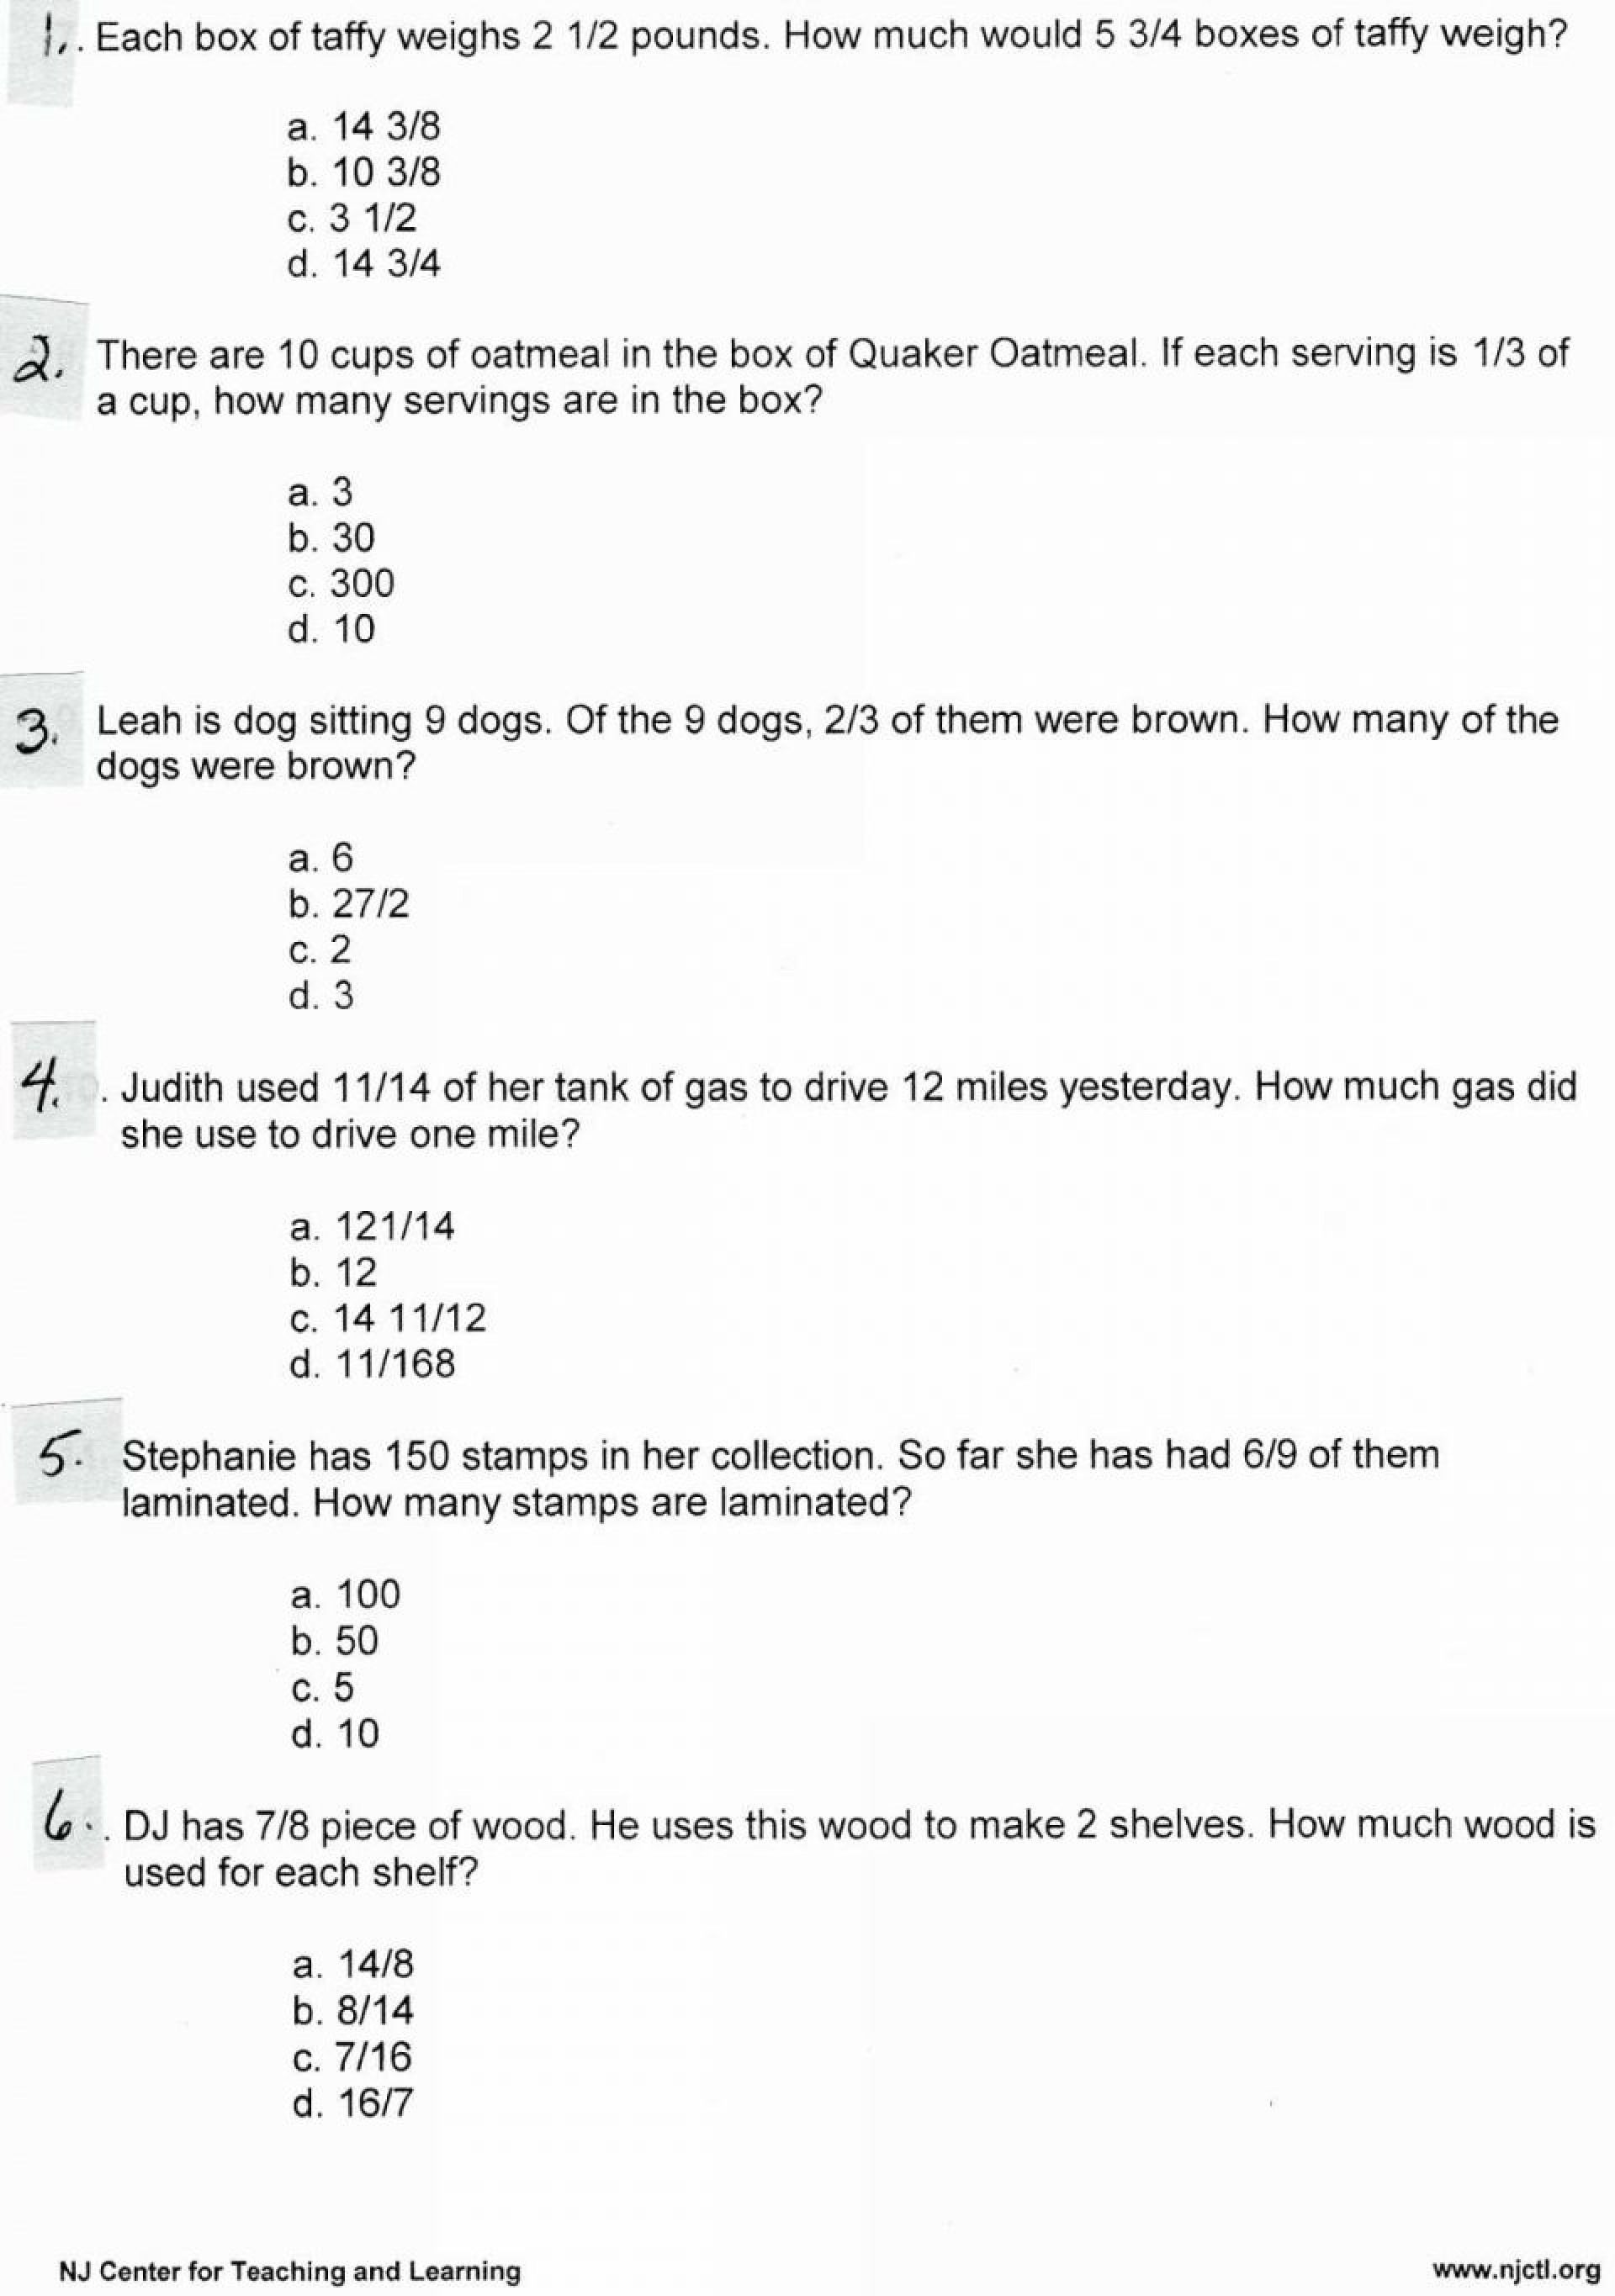 dividing-fractions-word-problems-6th-grade-worksheets-db-excelcom